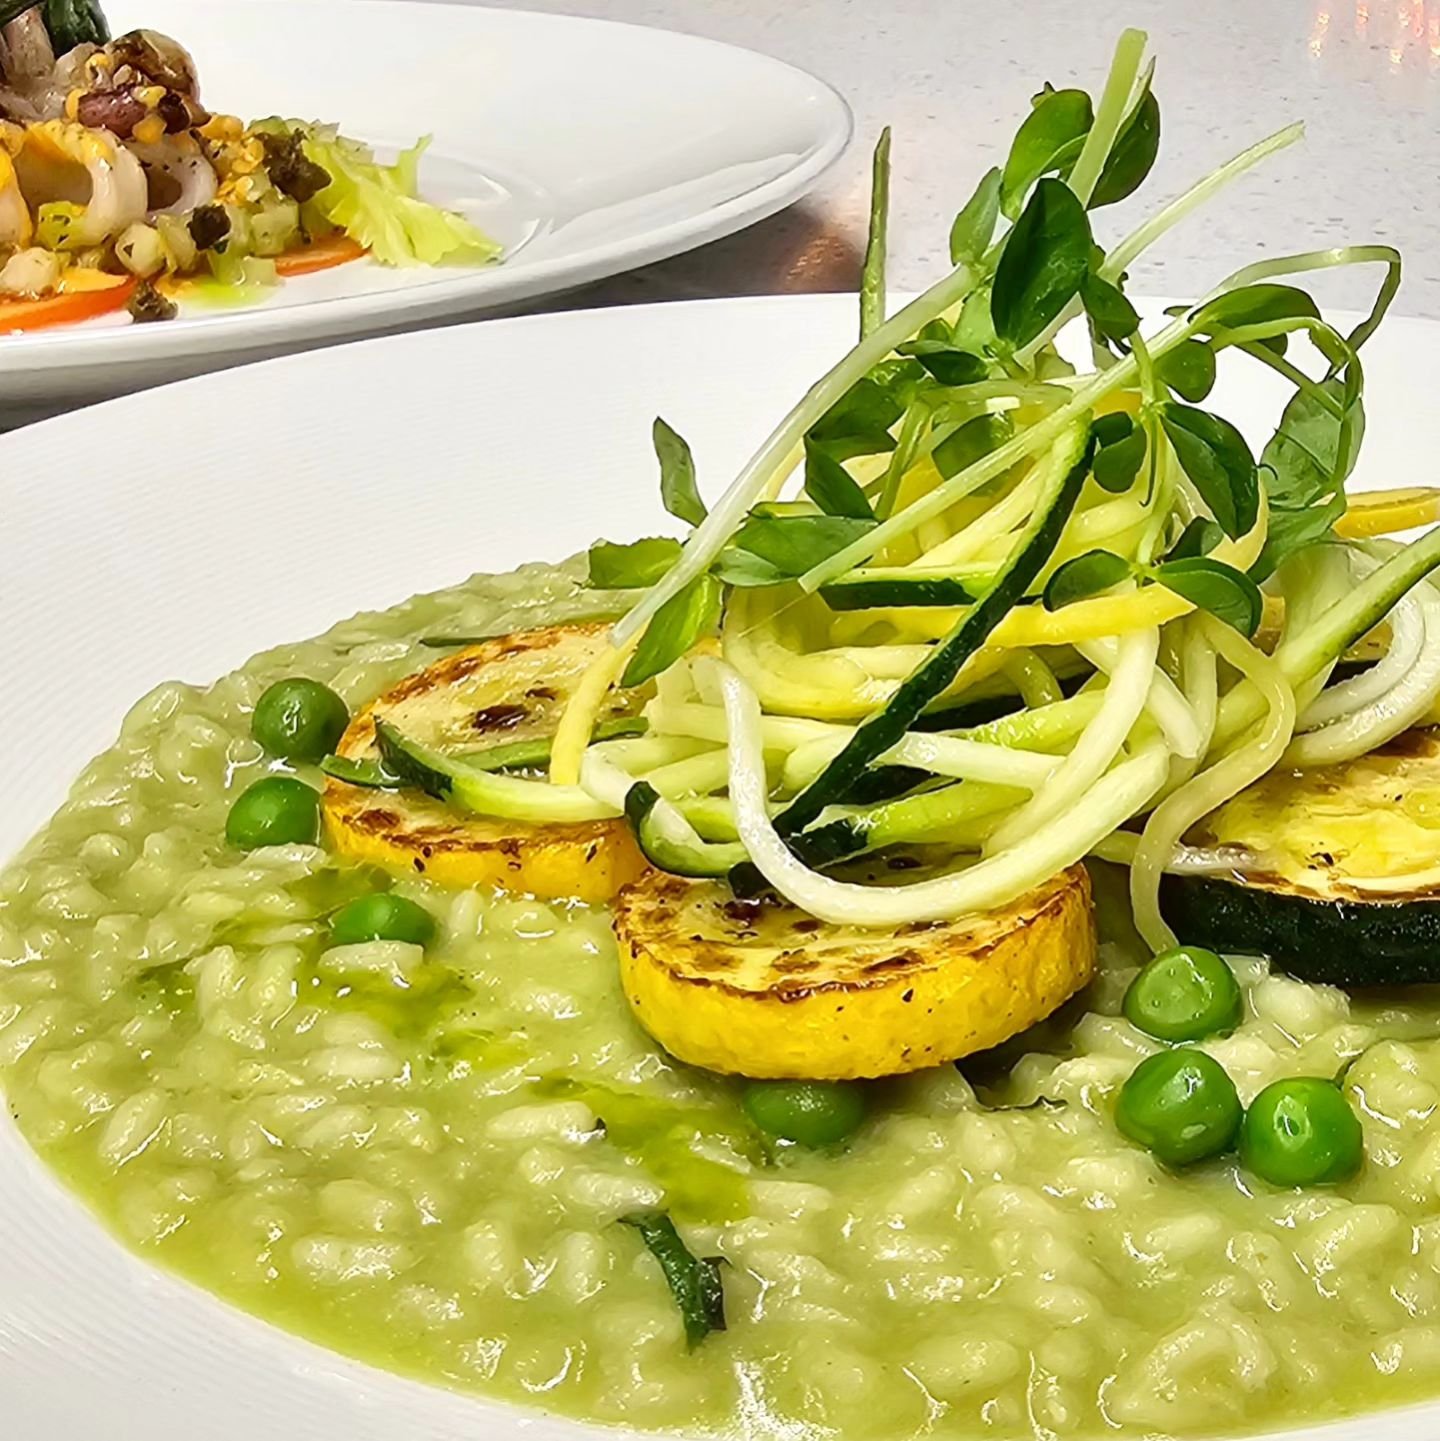 Risi e Bisi
~Peas &amp; Mint Risotto, Roasted Zucchini, Pea Shoots

A Student-Run Fine Dining Experience

Book your table at opentable.ca 
.
.
.
.
.
.
.
.
.
.
#thechefshouse #georgebrowncollege #gbcchca #chefschool #culinaryschool #finedining #finefo